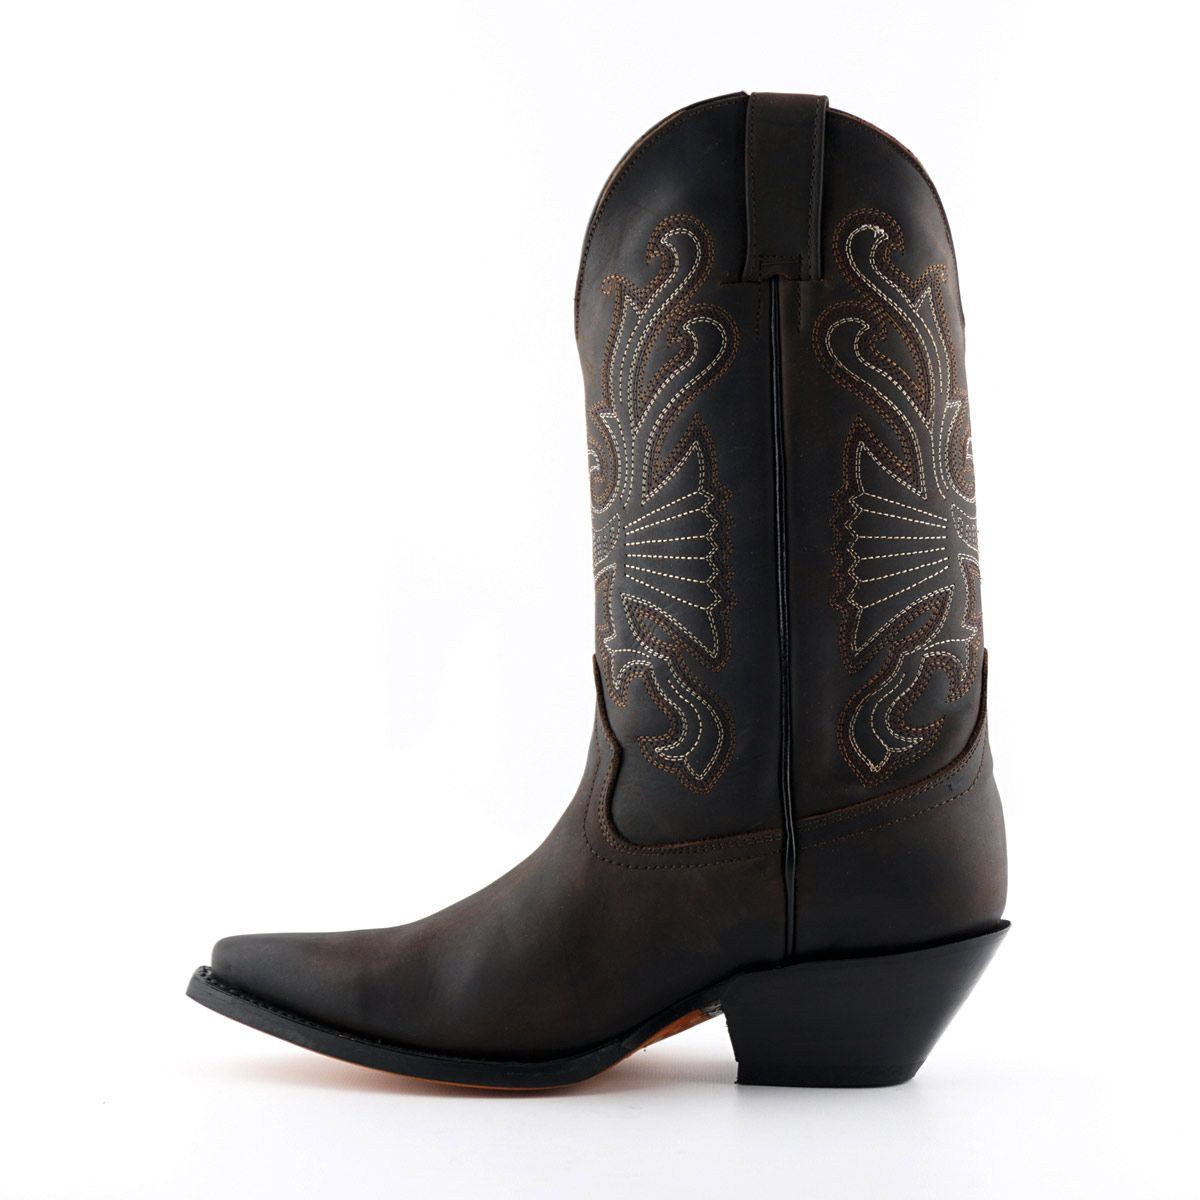 Grinders Brown Leather Western Cowboy Boots-Buffalo